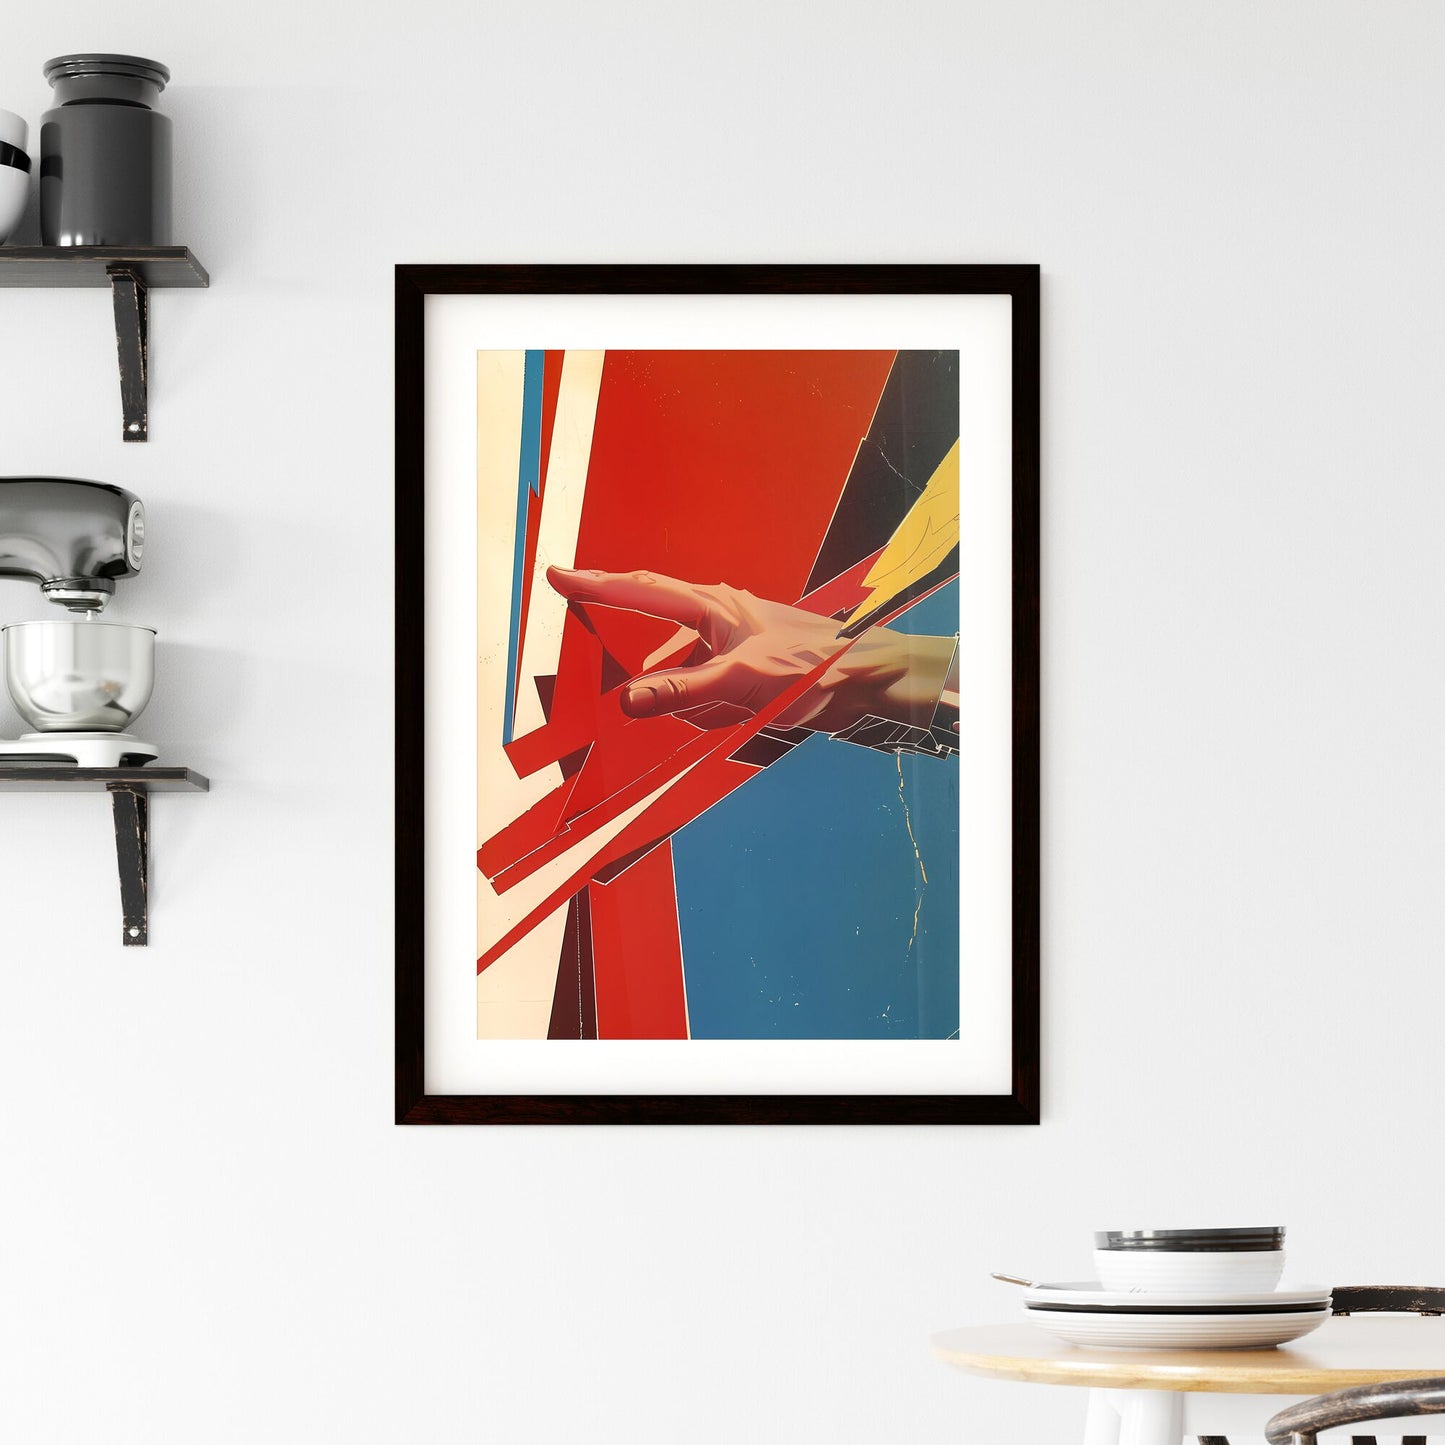 Cubist Political Poster: Animated Hand Opens Paper, Blown-Off-Roof Perspective, Color-Blocked Shapes, Soviet Labor Depictions, Rubber Hand, Vibrant Painting Art Default Title